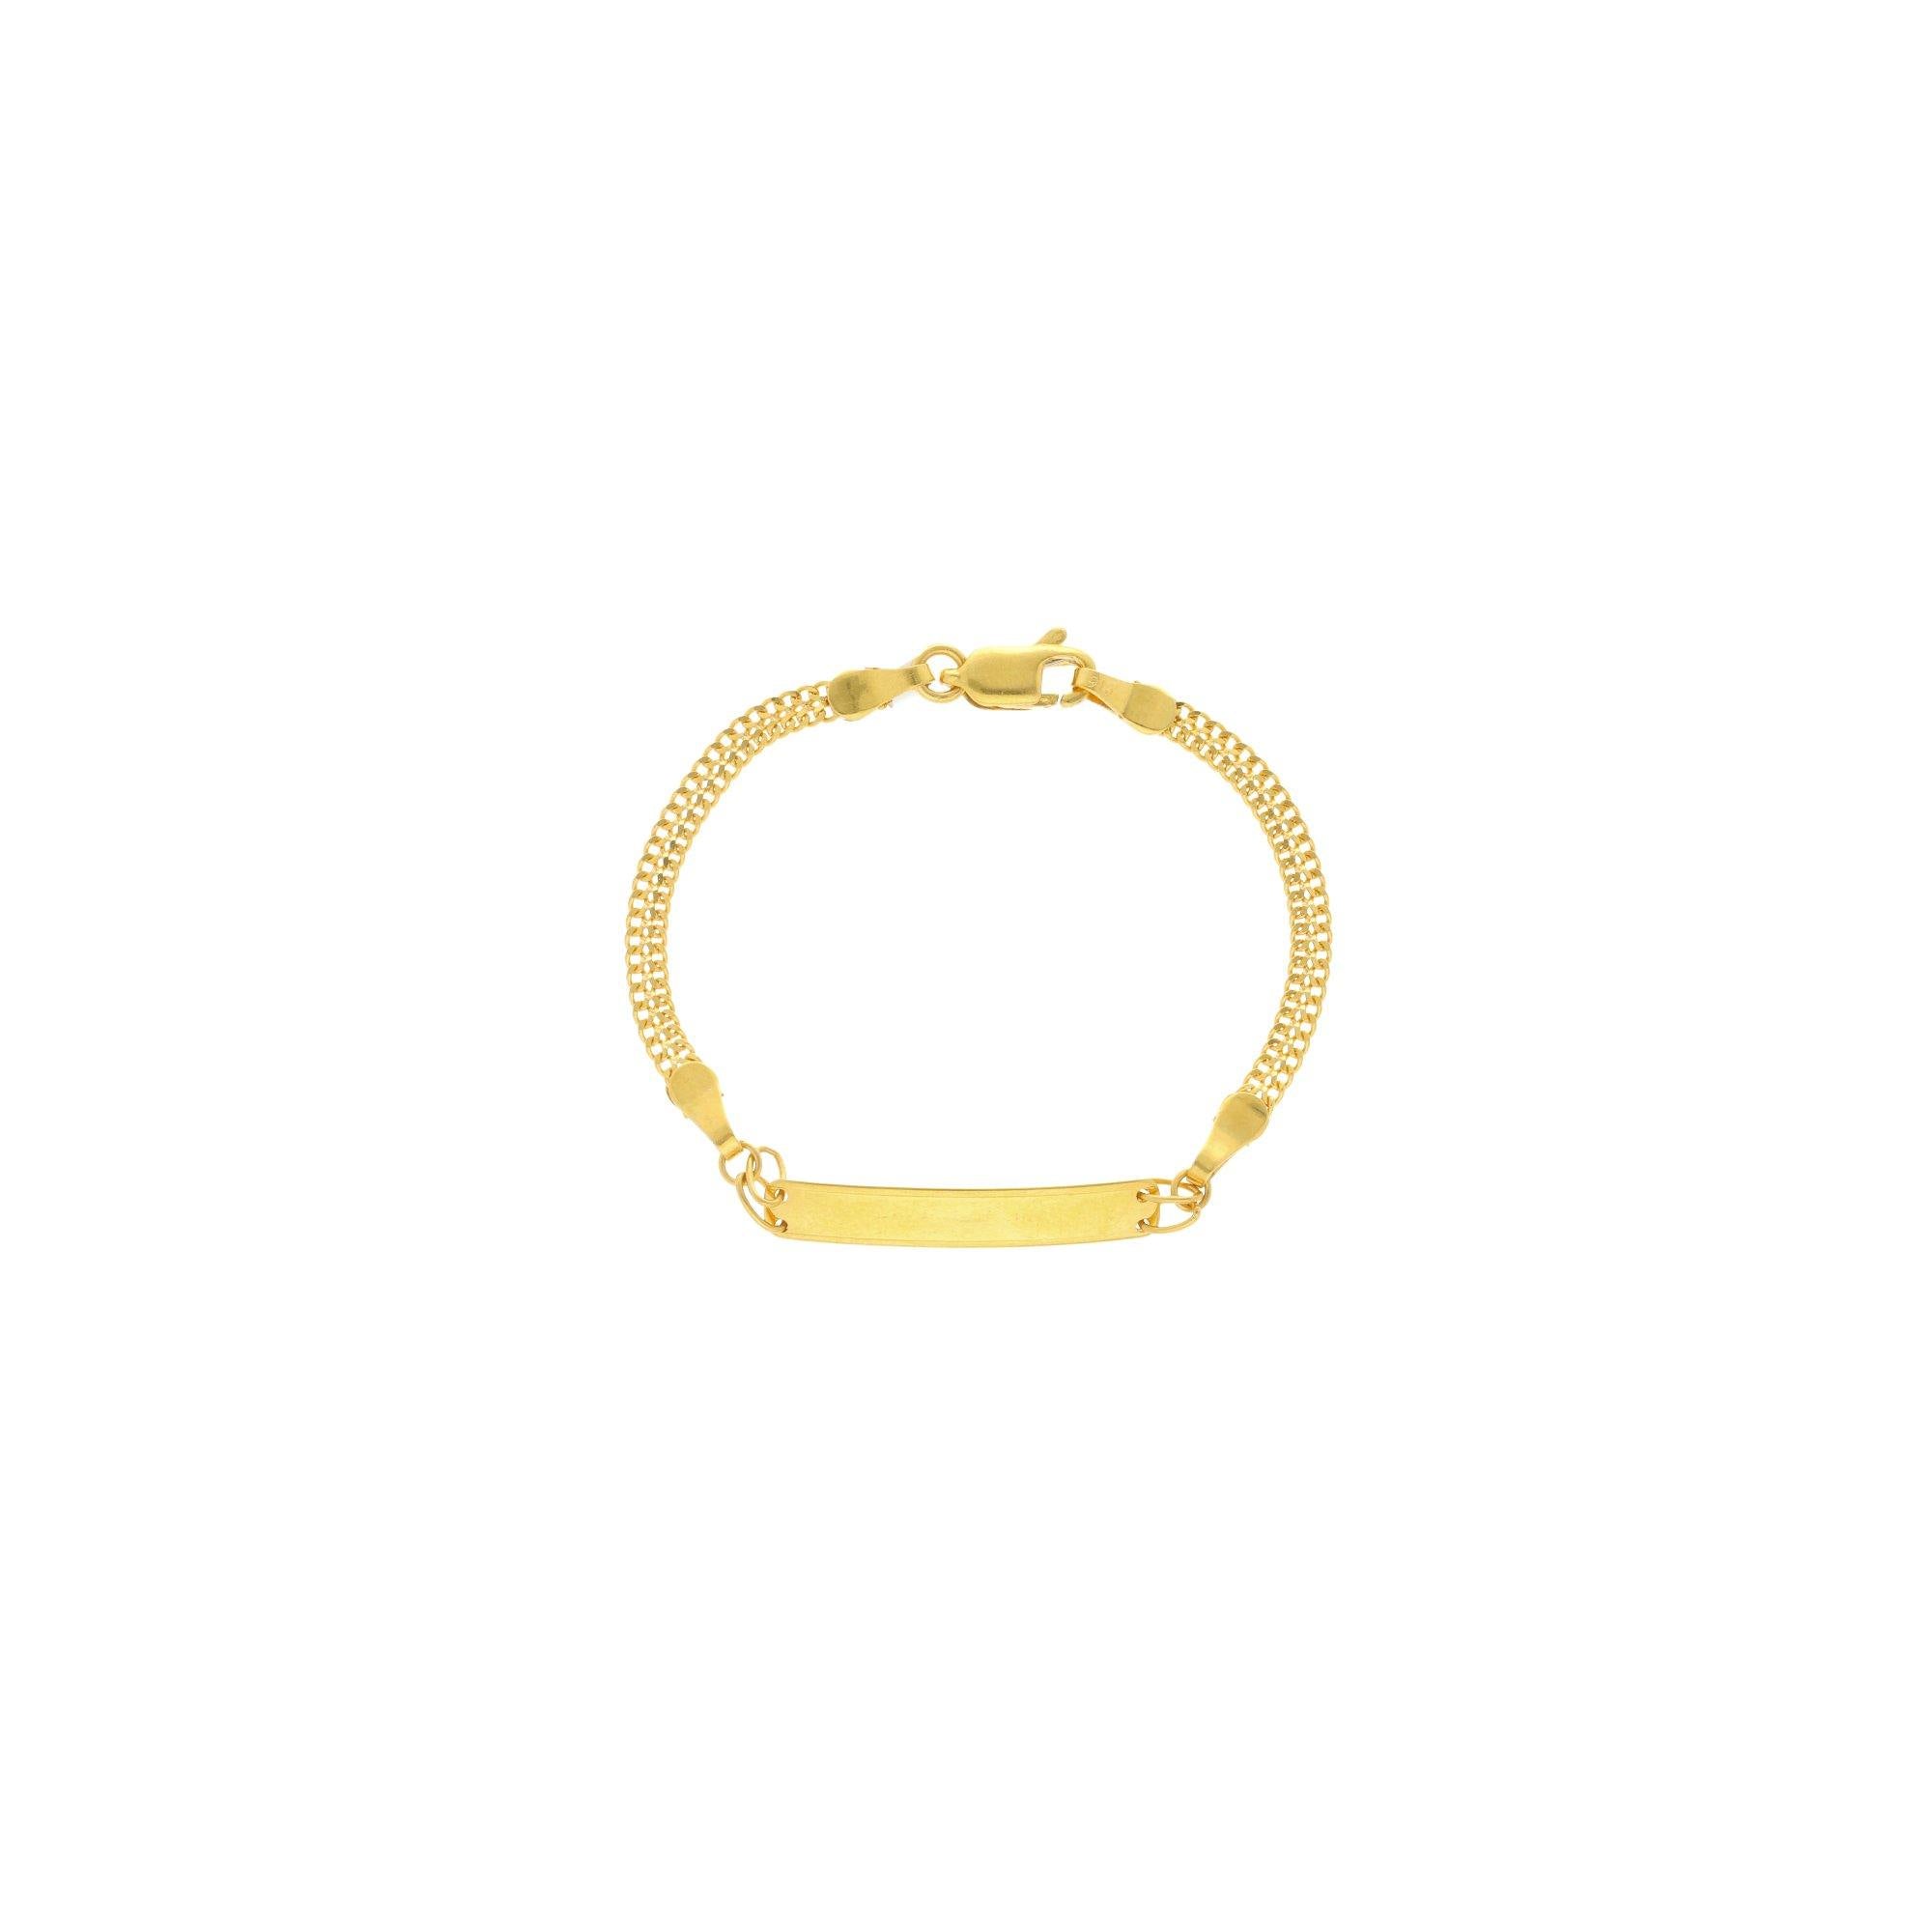 Luxury 24K Ethnic Gold Baby Bangles Set Of 4 Dubai Bangled Bracelets For  Kids Perfect Child Jewelry And Birthday Gift 220715 From Nan05, $13.28 |  DHgate.Com